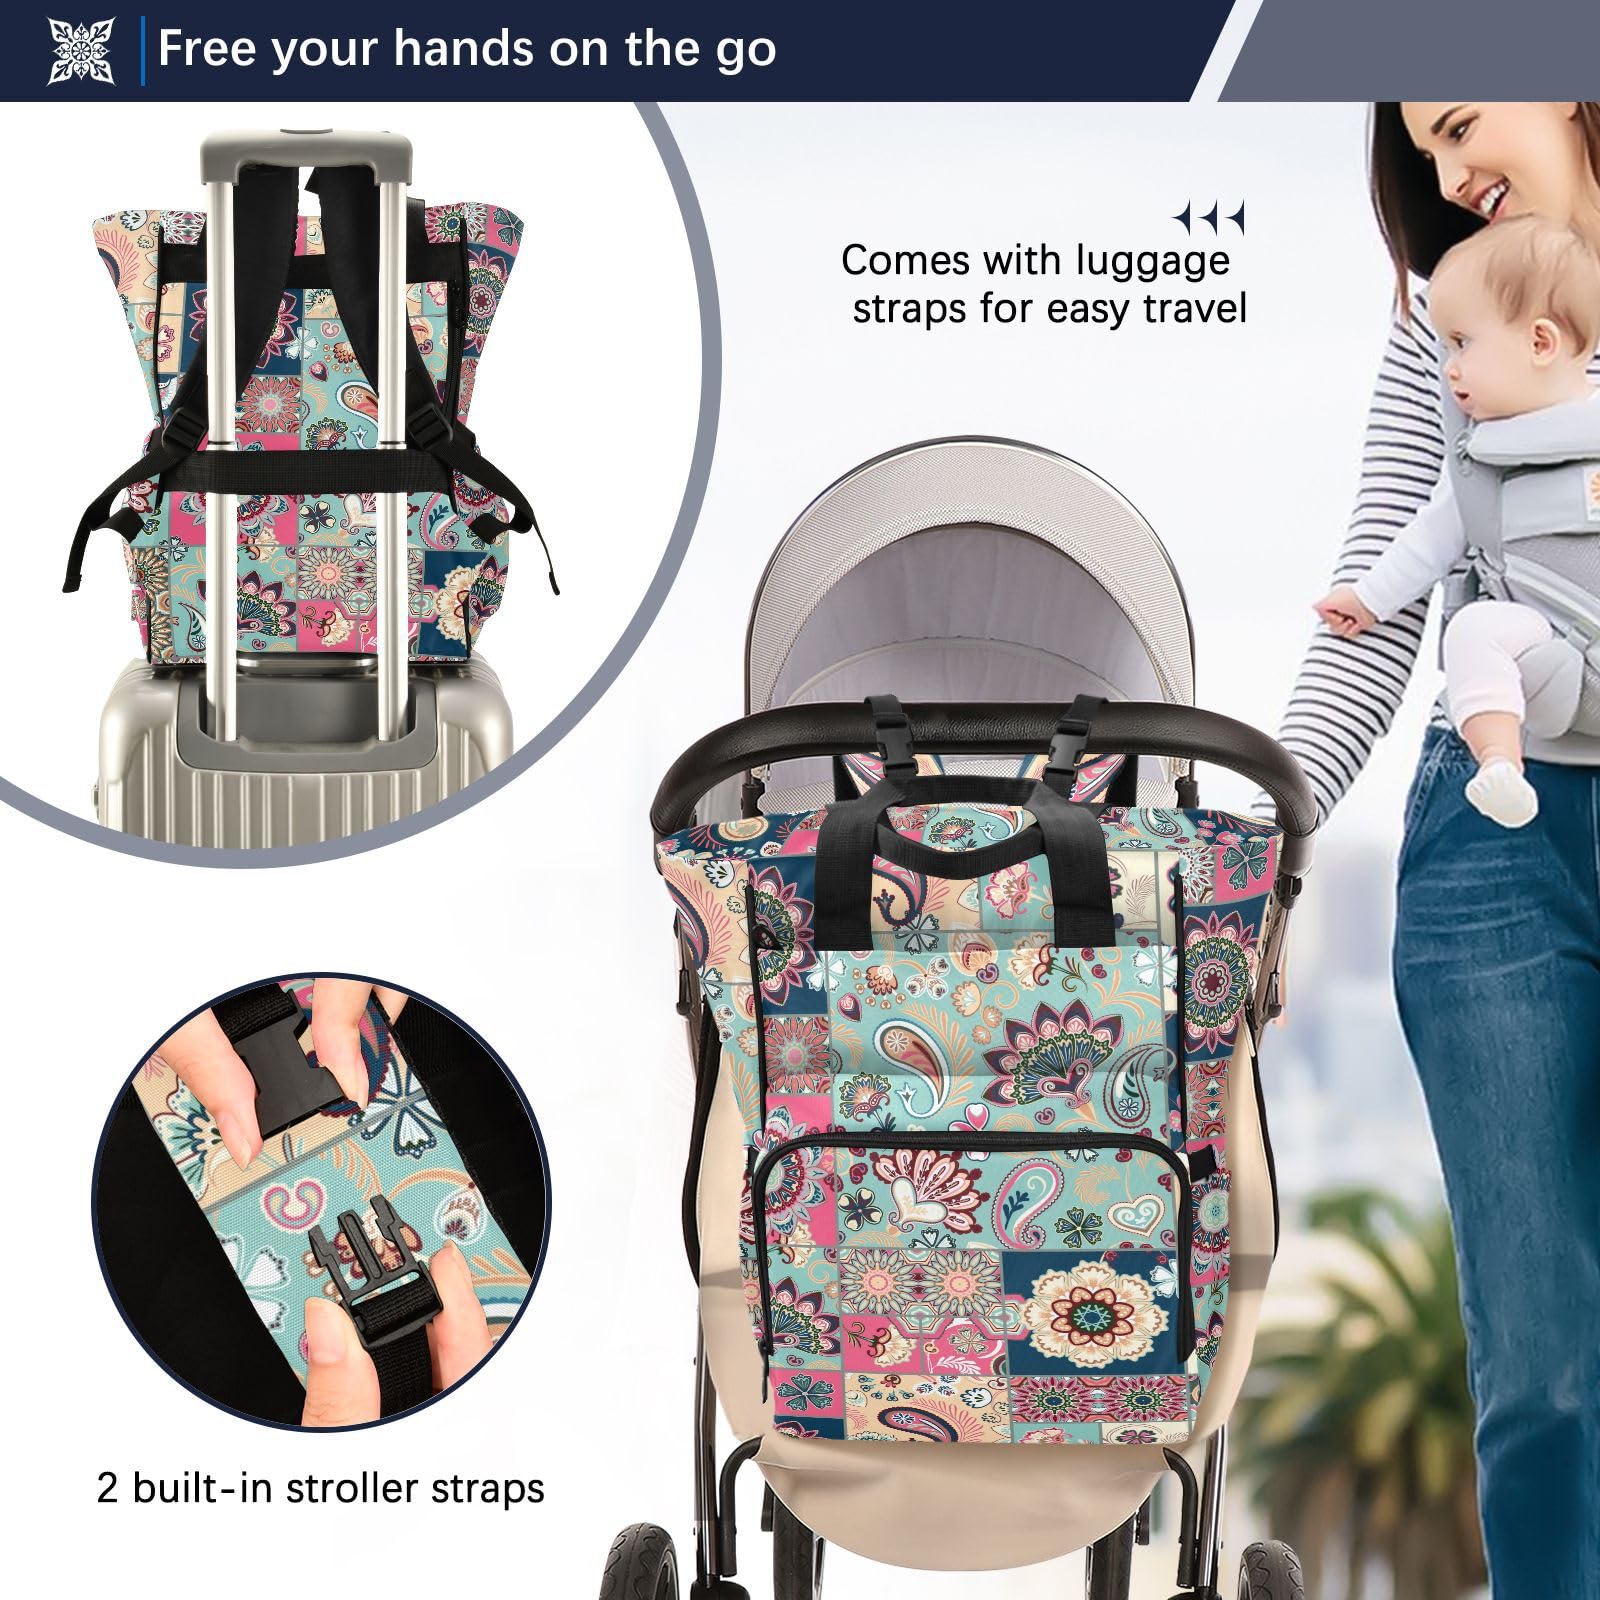 innewgogo Paisley Flowers Diaper Bag Backpack for Men Women Large Capacity Baby Changing Totes with Three Pockets Multifunction Travel Back Pack for Shopping Travelling